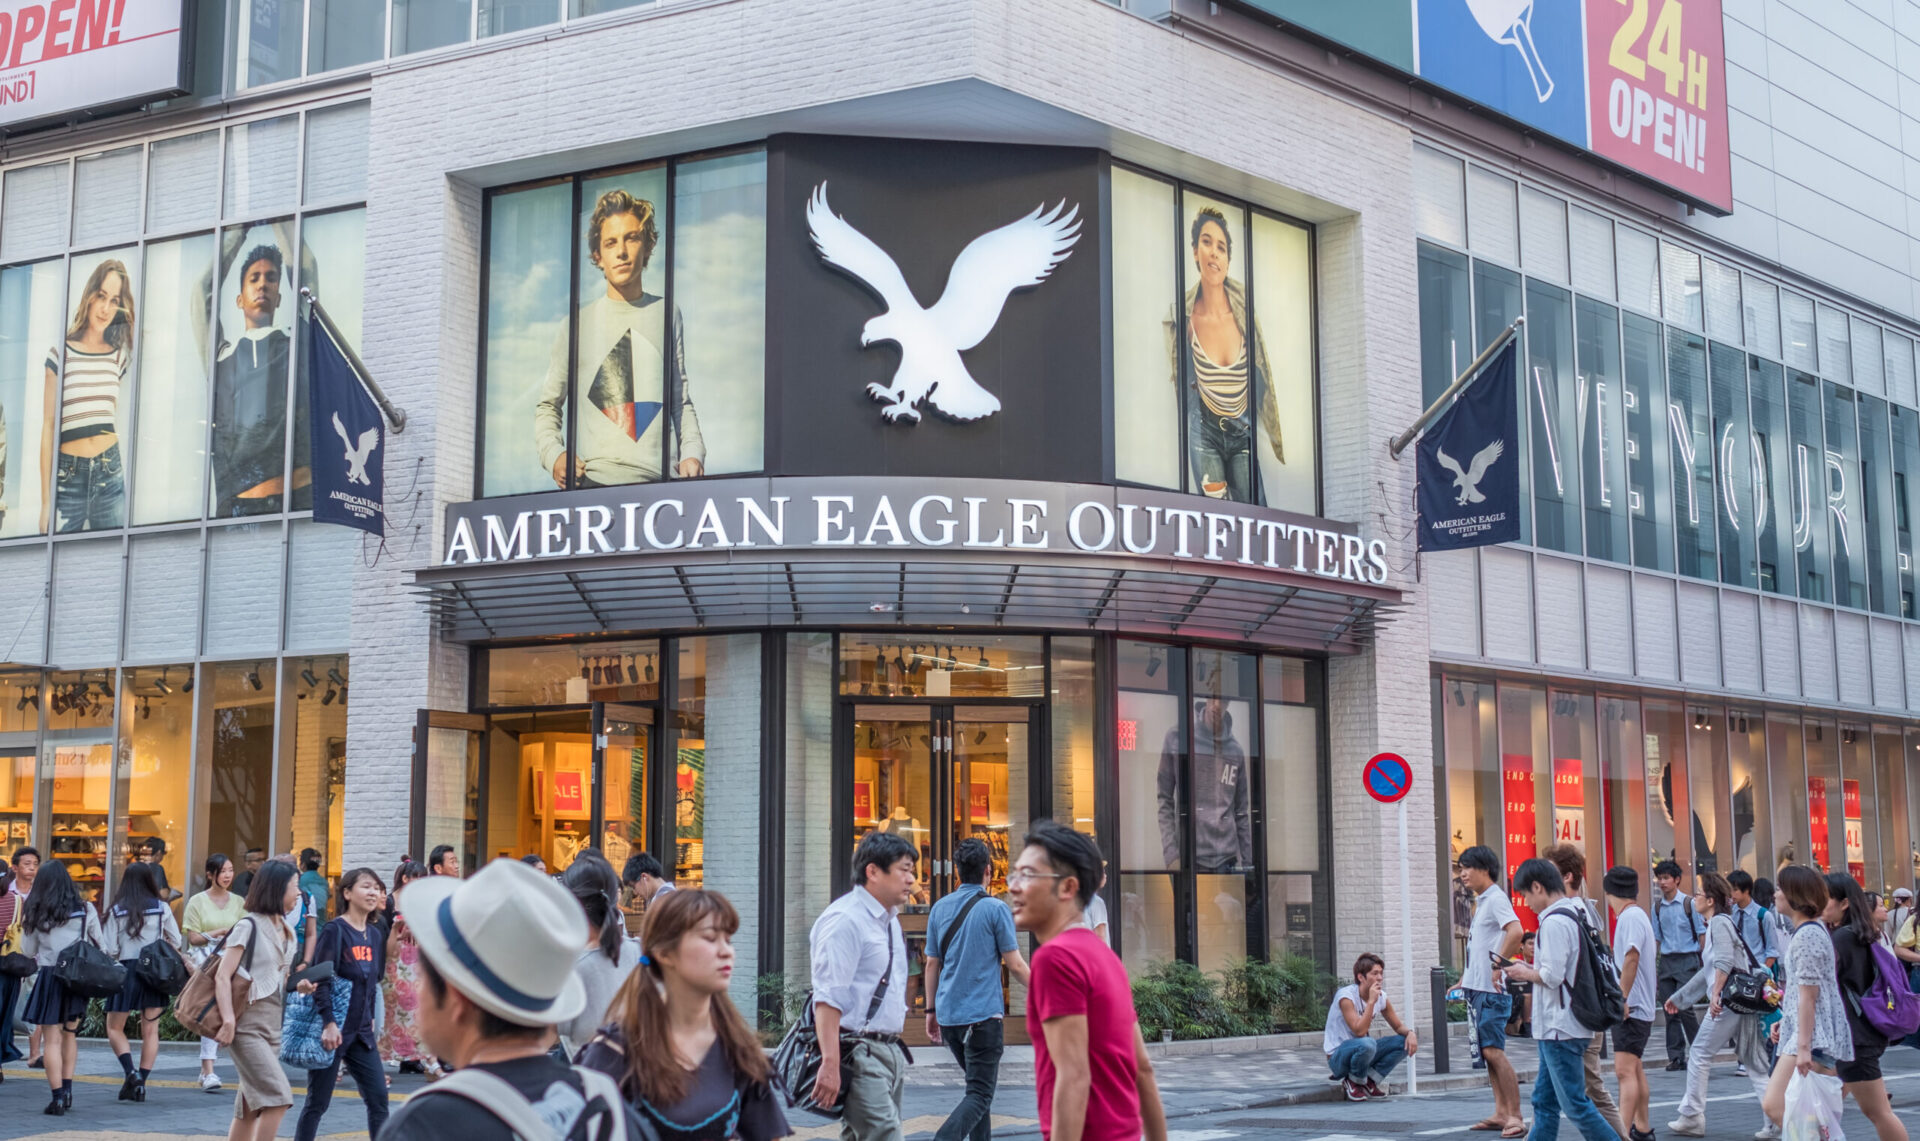 Mobile-First Drives Digital Strategy At American Eagle Outfitters